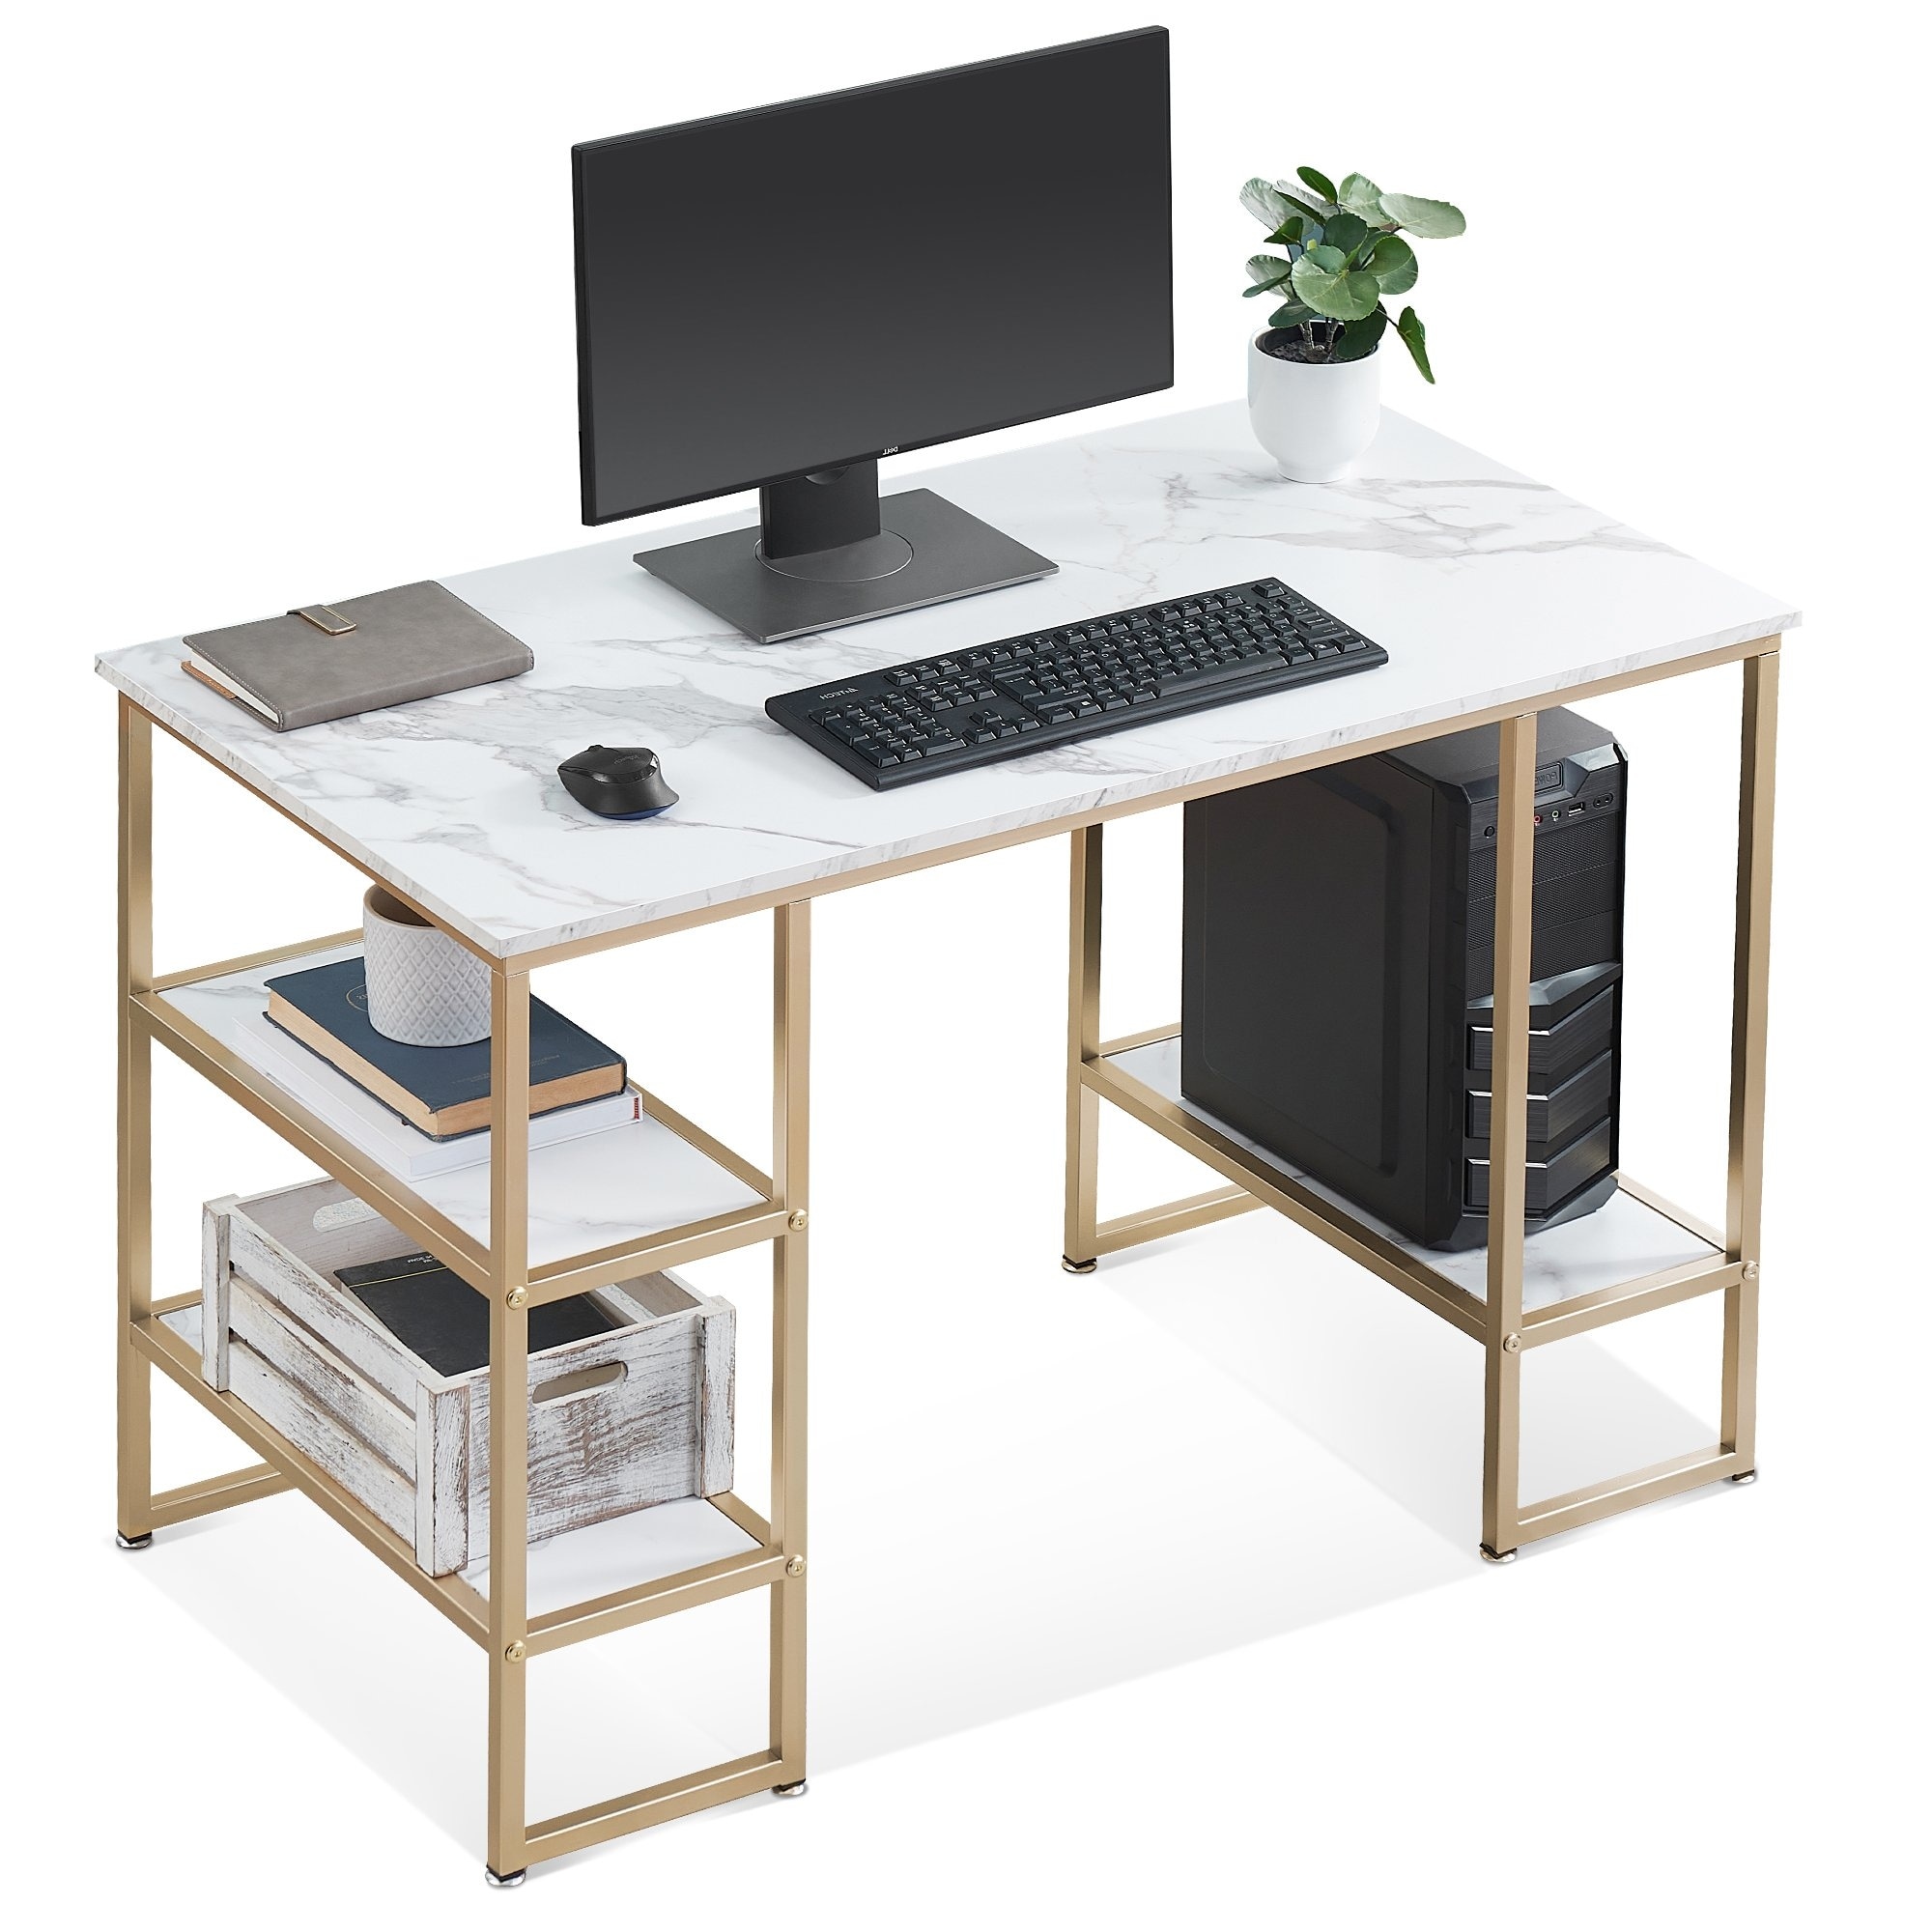 https://ak1.ostkcdn.com/images/products/is/images/direct/60a72d27c9e7414383de7ae7a824a0925d553c89/Ivinta-Computer-Desk-Office-Desk-with-3-Tier-Shelves%2C-White-Desk-for-Small-Space%2C-Gaming-Desk-with-CPU-Stand%2C-Vanity-Desk.jpg